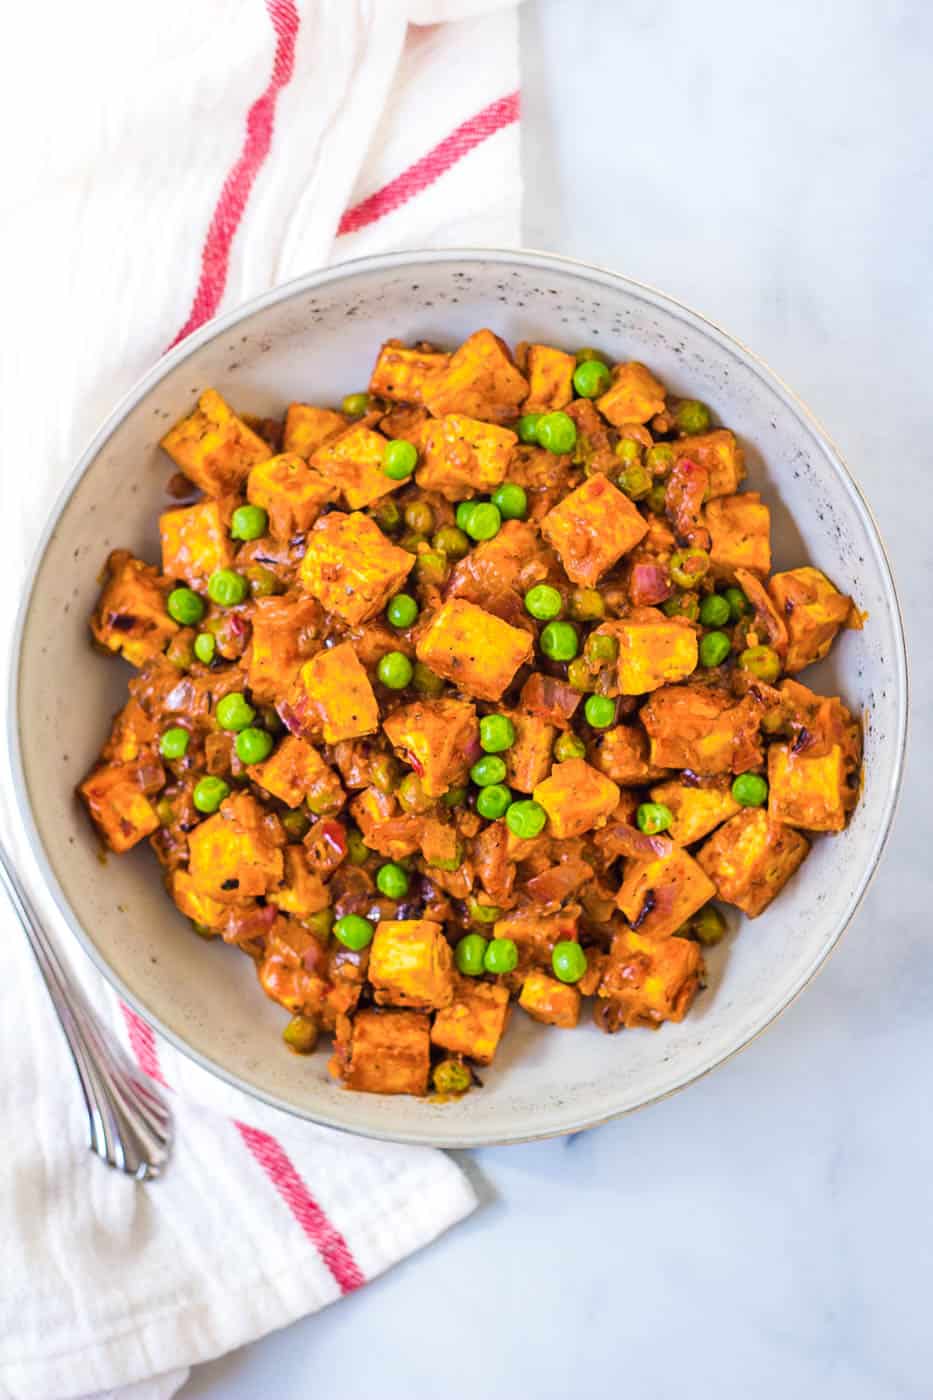 A bowl of sweet potato and peas with a fork.